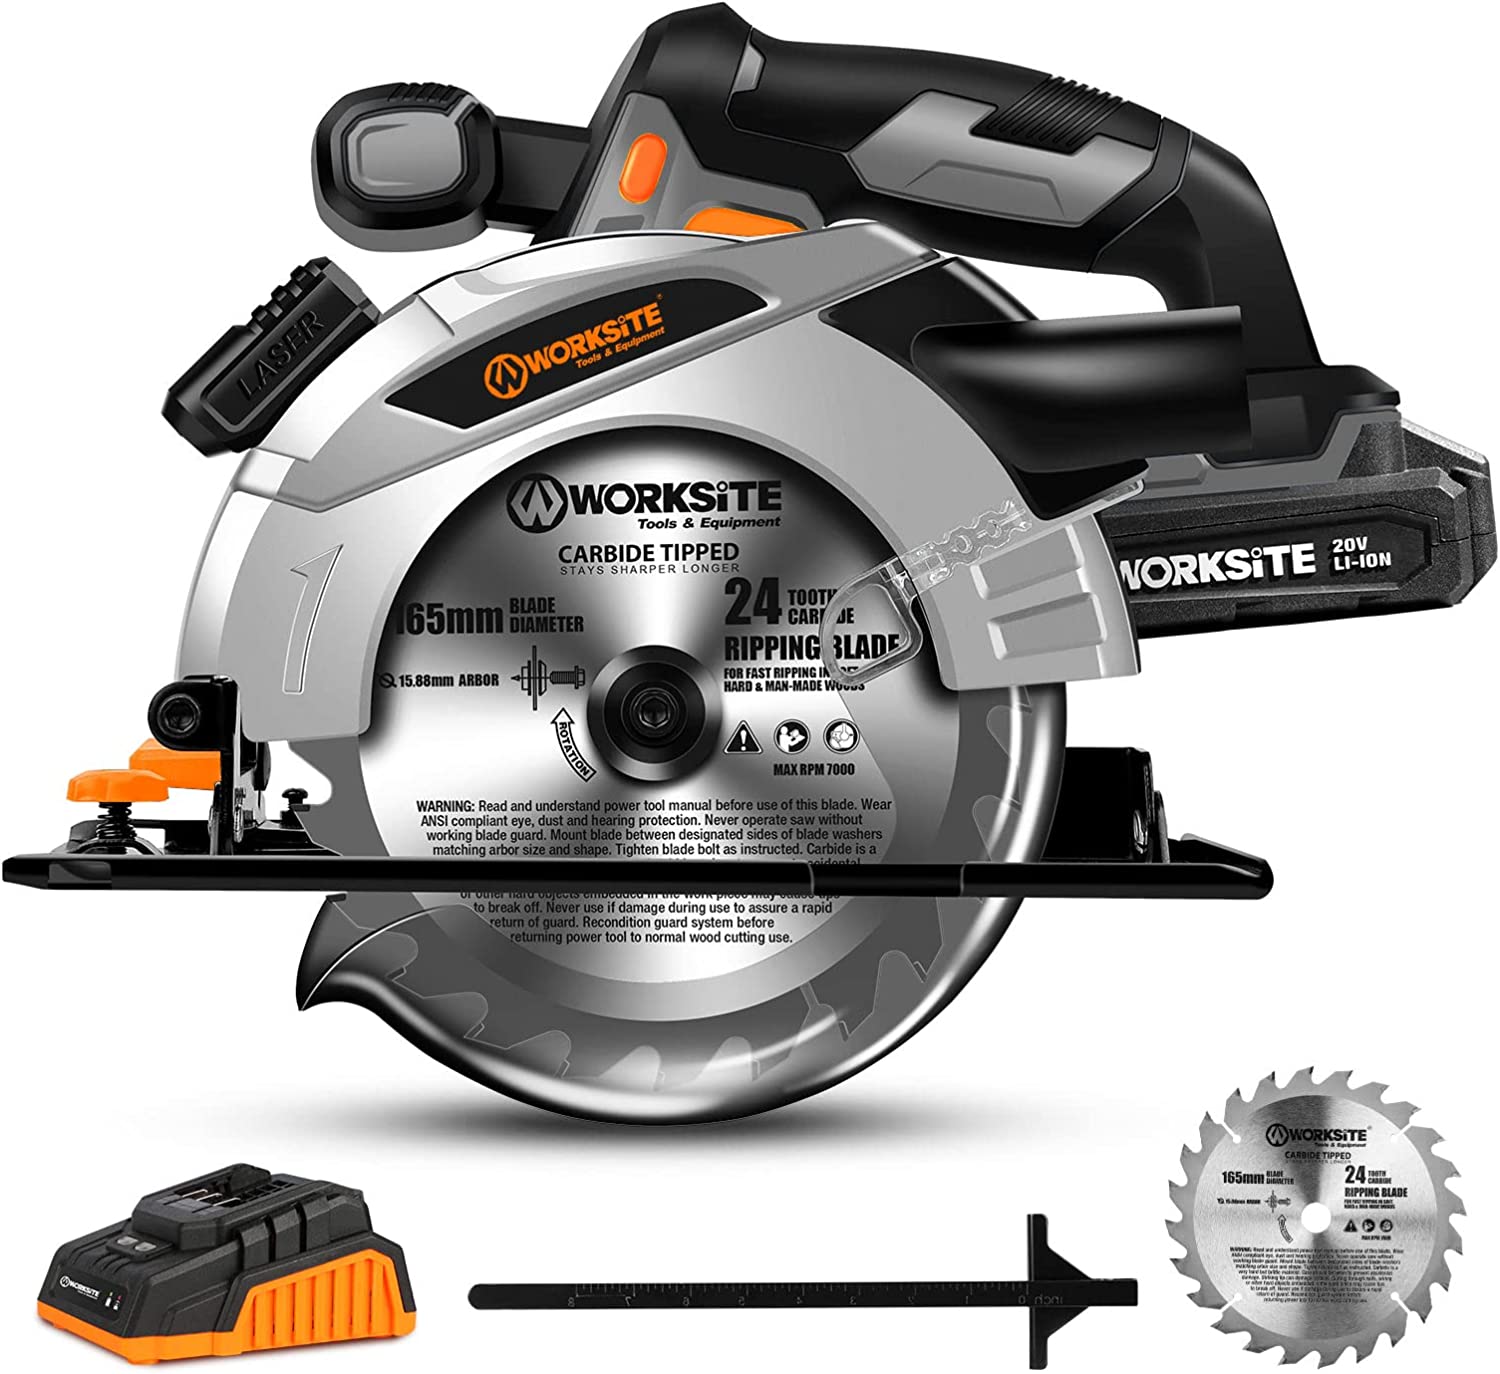 WORKSITE Cordless Circular Saw, 20V MAX 6-1/2 Inch [...]